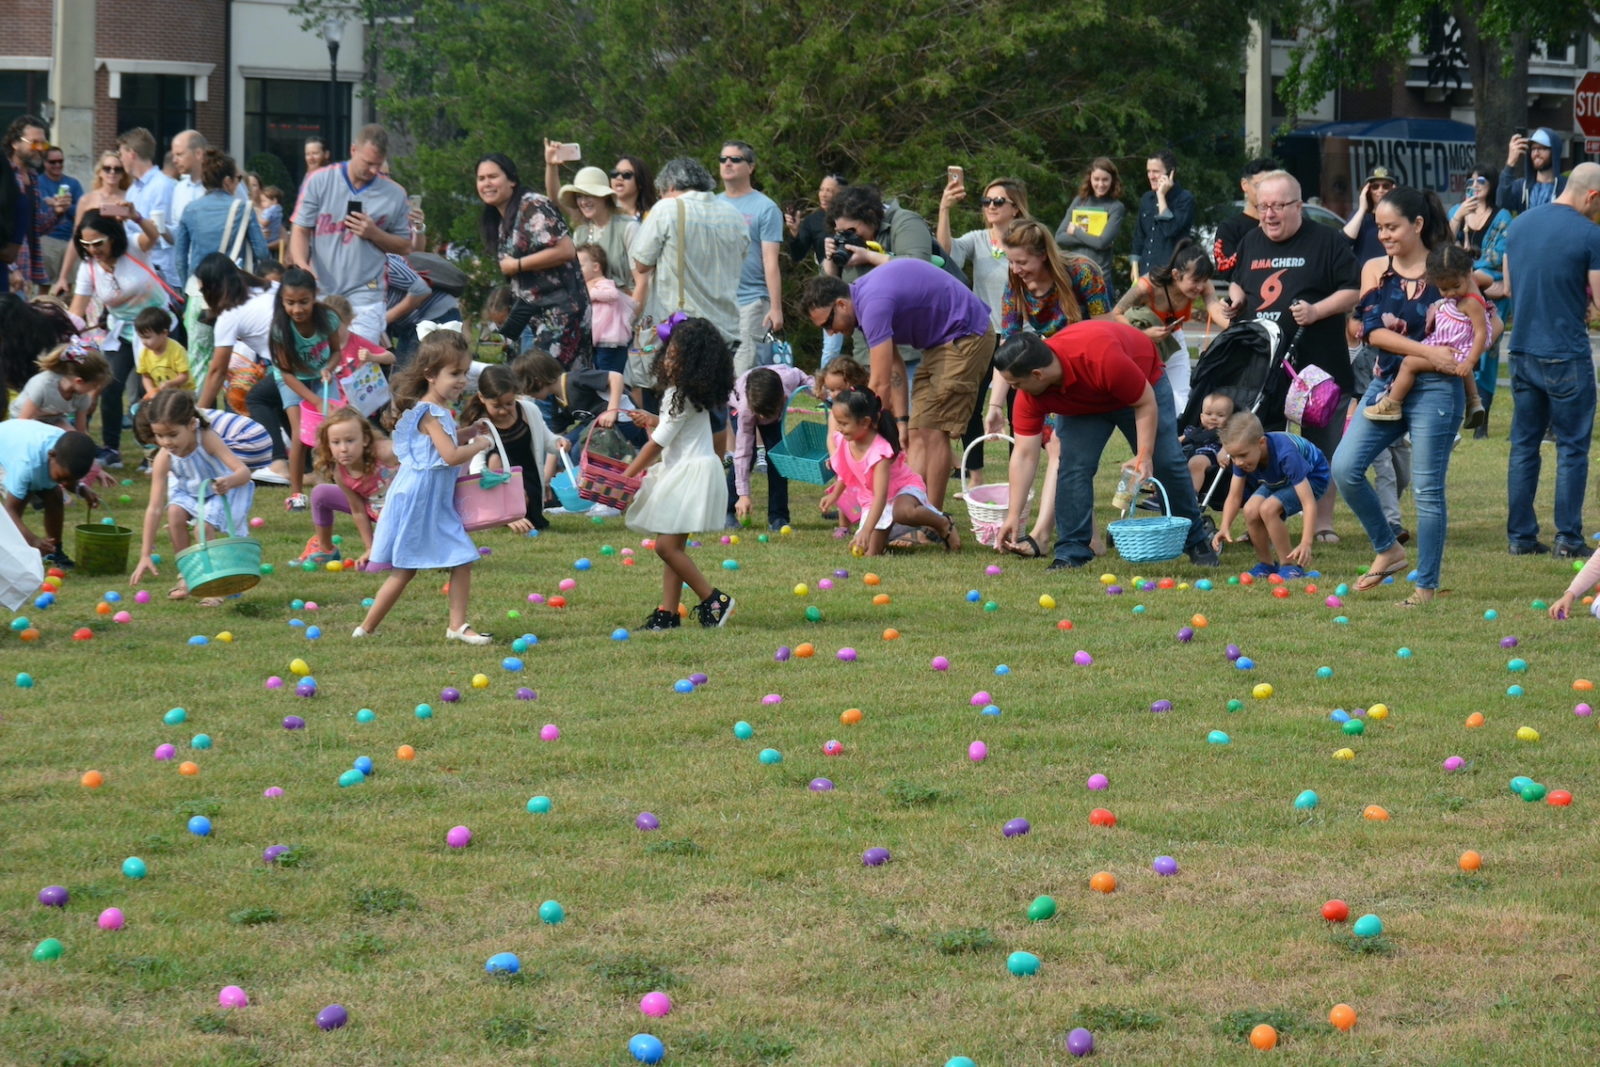 Children collect Easter eggs at annual egg hunt in Central Park.